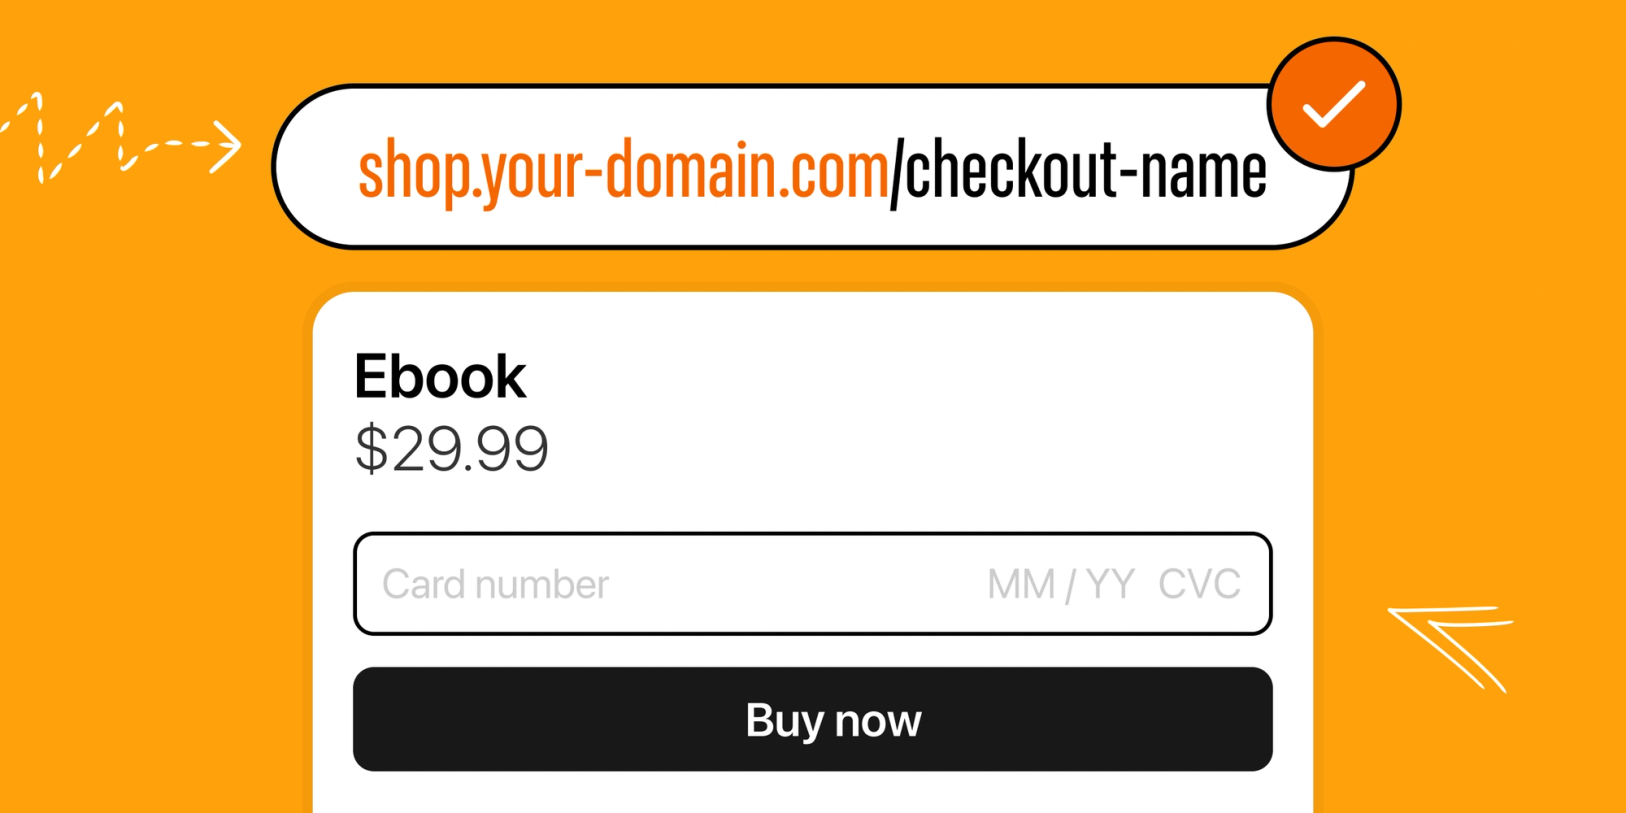 Claim your free Checkout Page URL and add a custom domain!